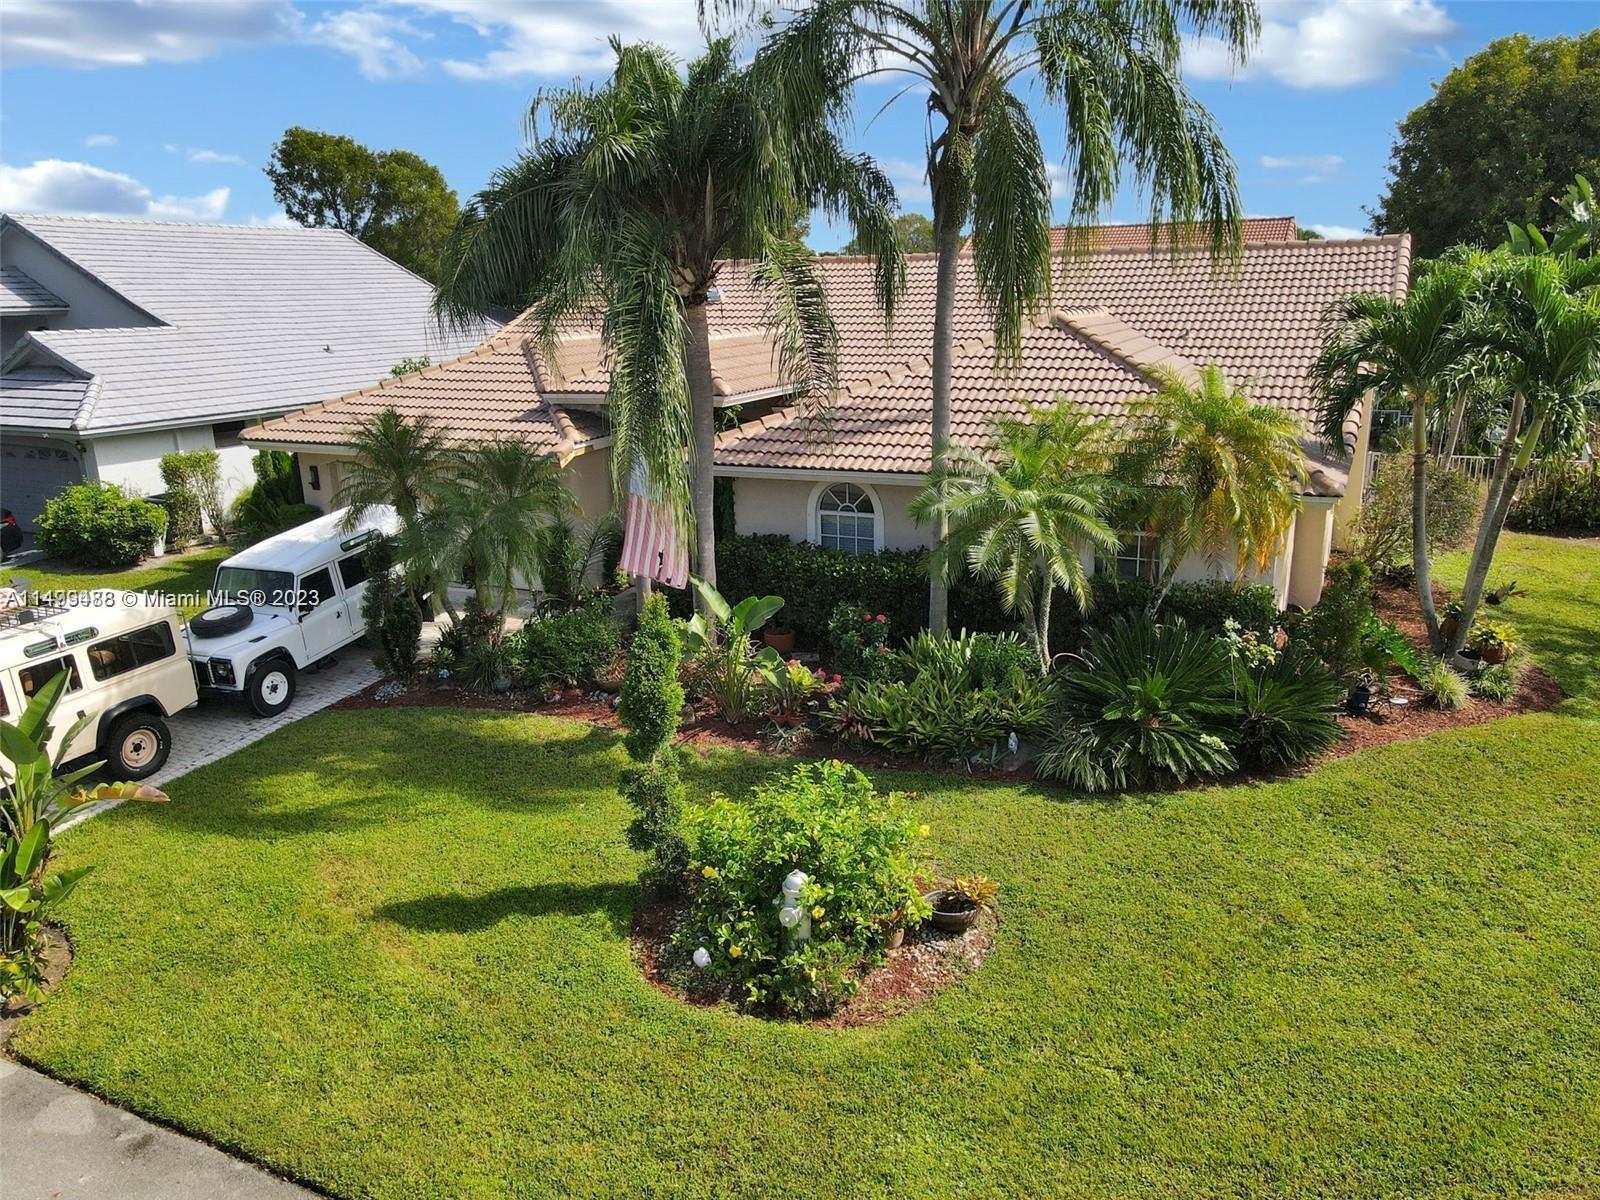 Photo of 4321 NW 63rd Ave in Coral Springs, FL